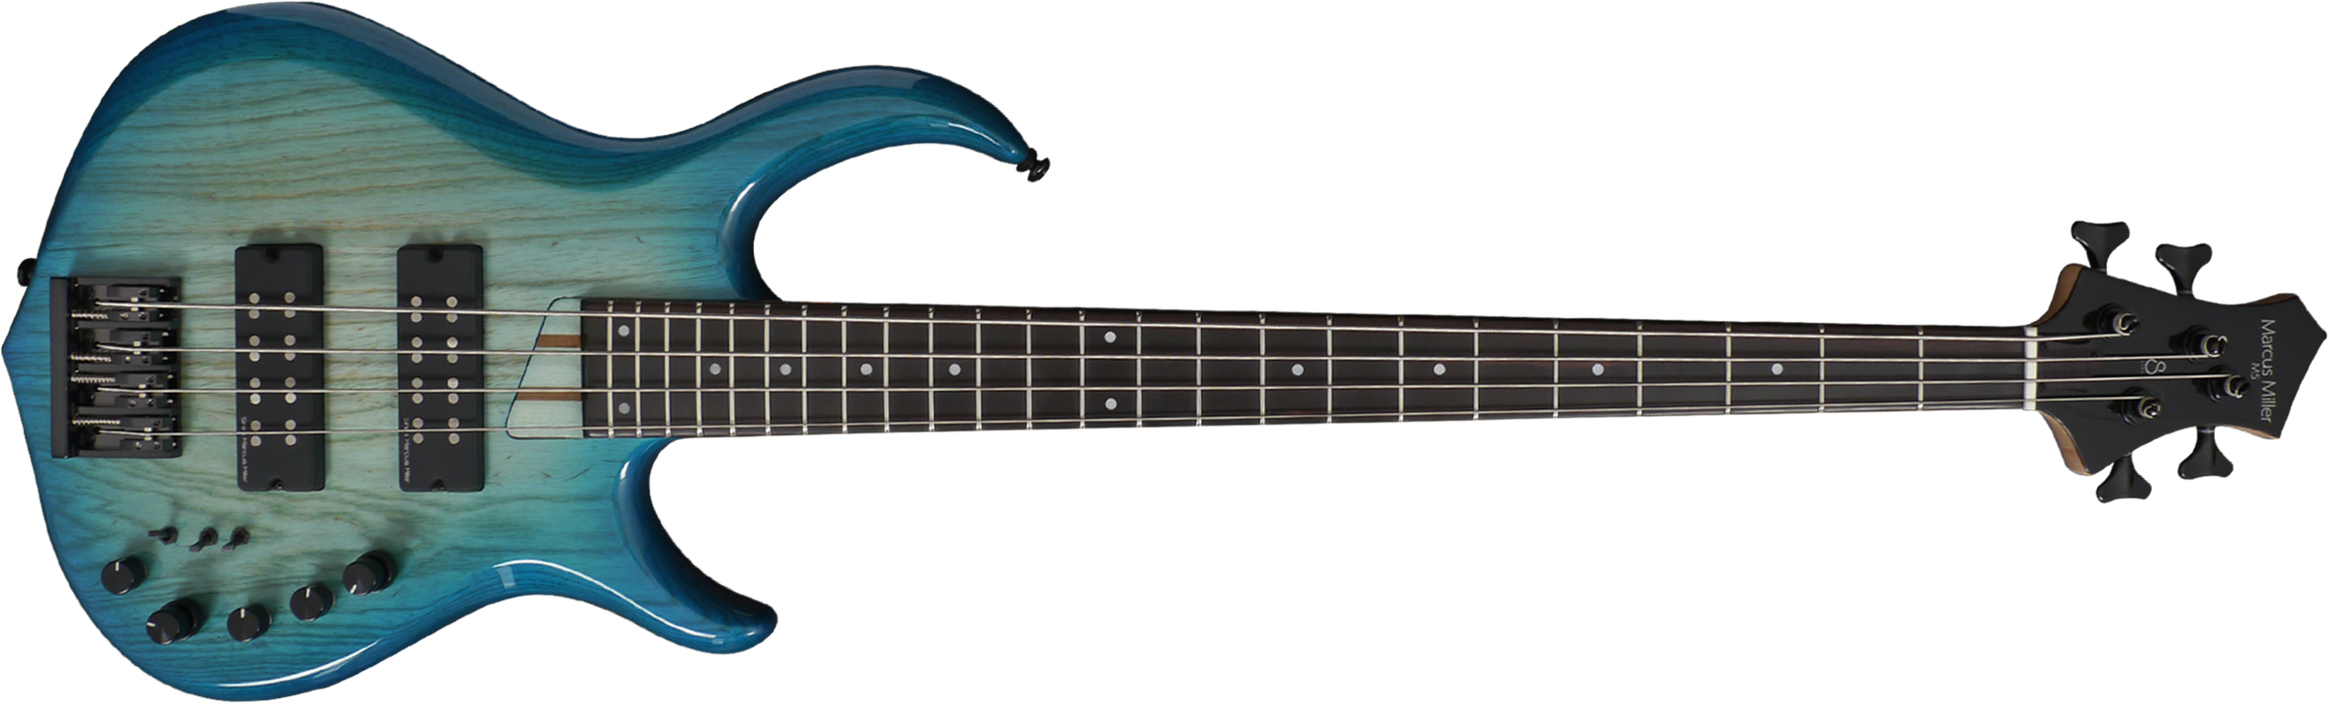 Marcus Miller M5 Swamp Ash 4st Active Eb - Transparent Blue - Solid body electric bass - Main picture